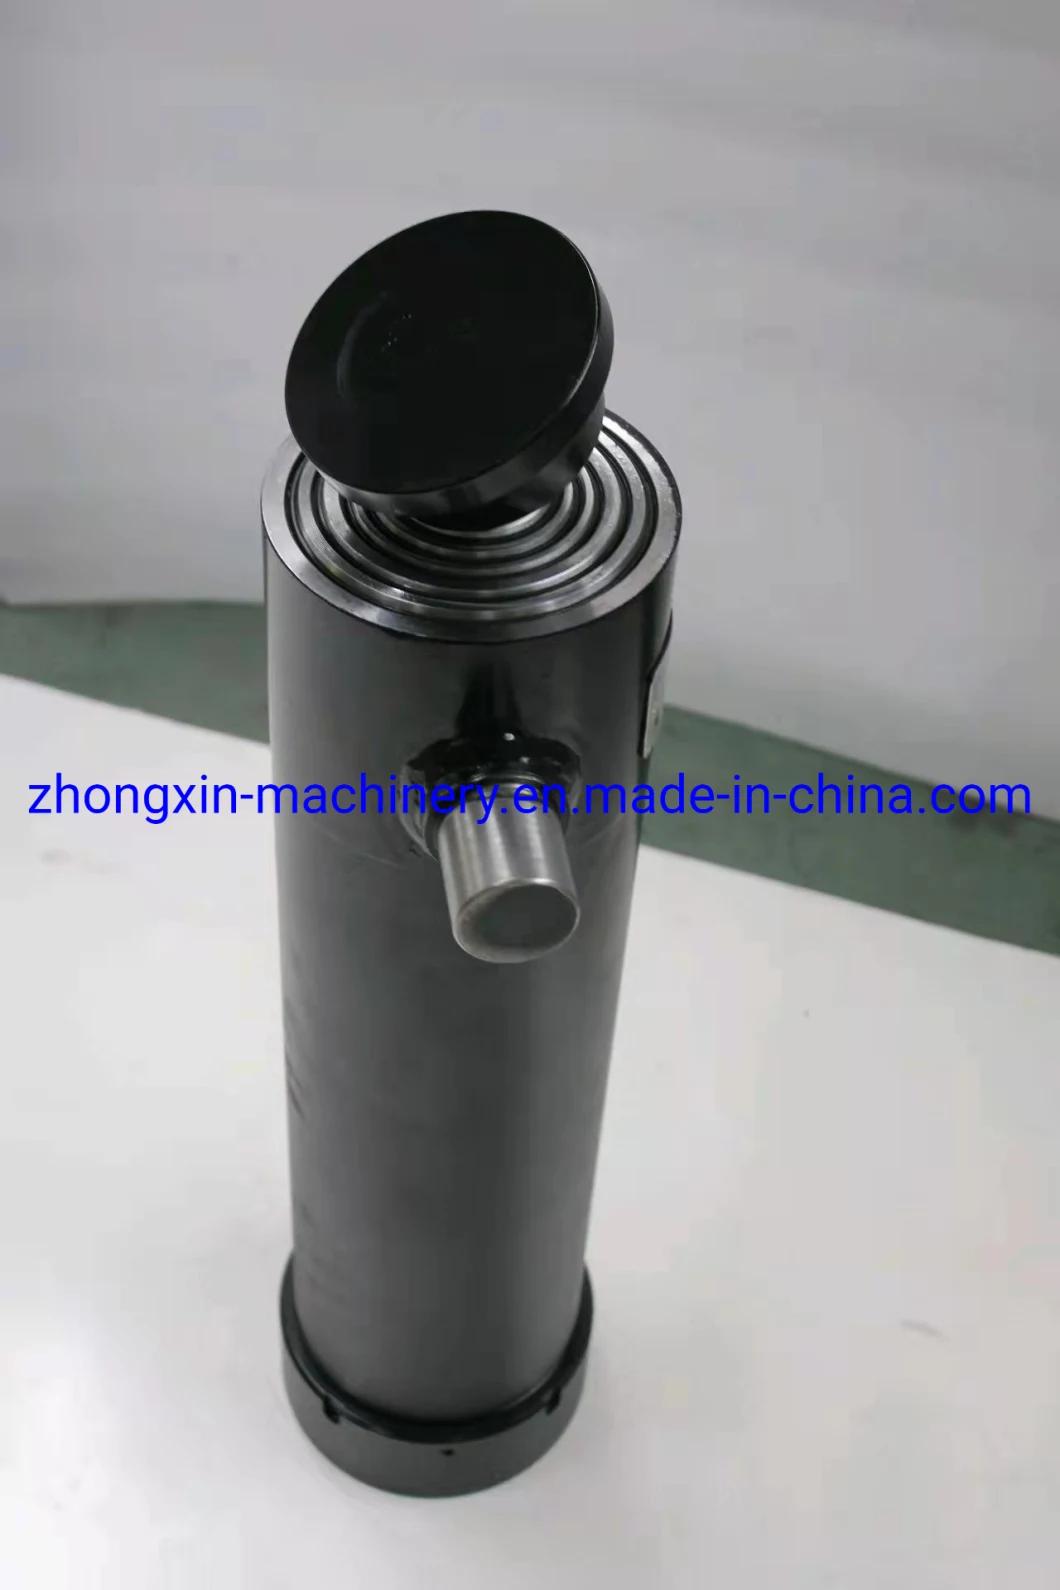 Small Side Turn Hydraulic Cylinders Manufacturer for Dump Truck